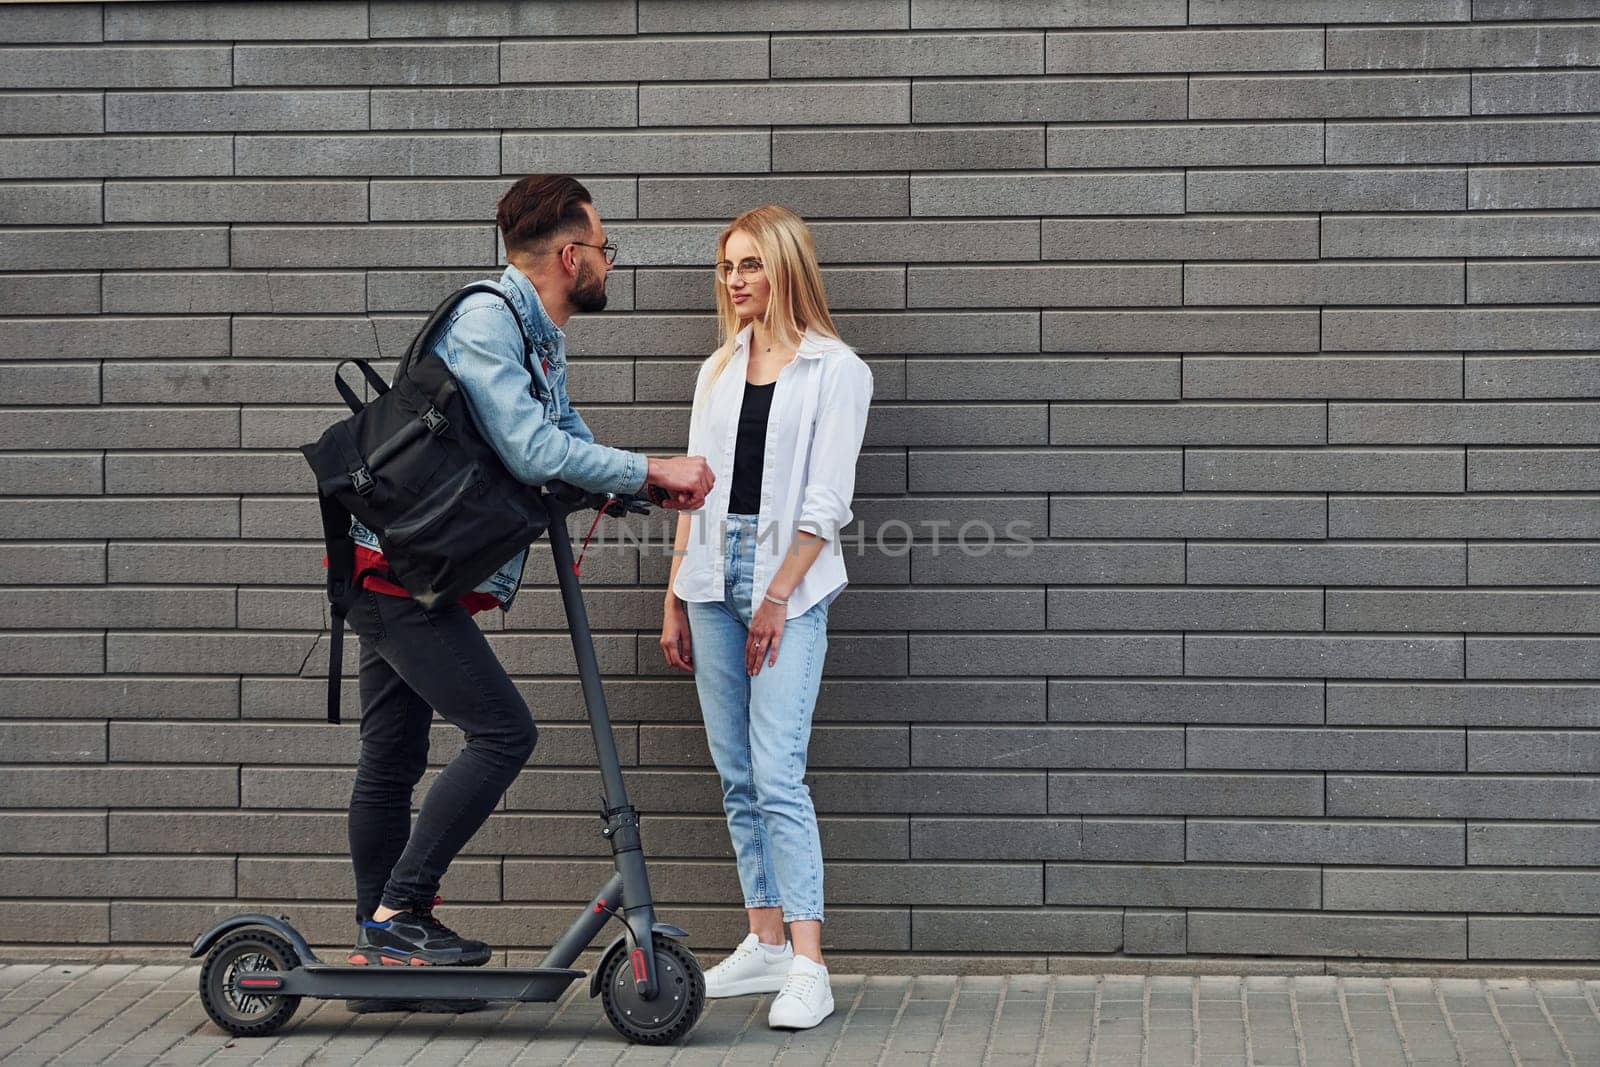 With electric schooter. Young stylish man with woman in casual clothes outdoors together. Conception of friendship or relationships.